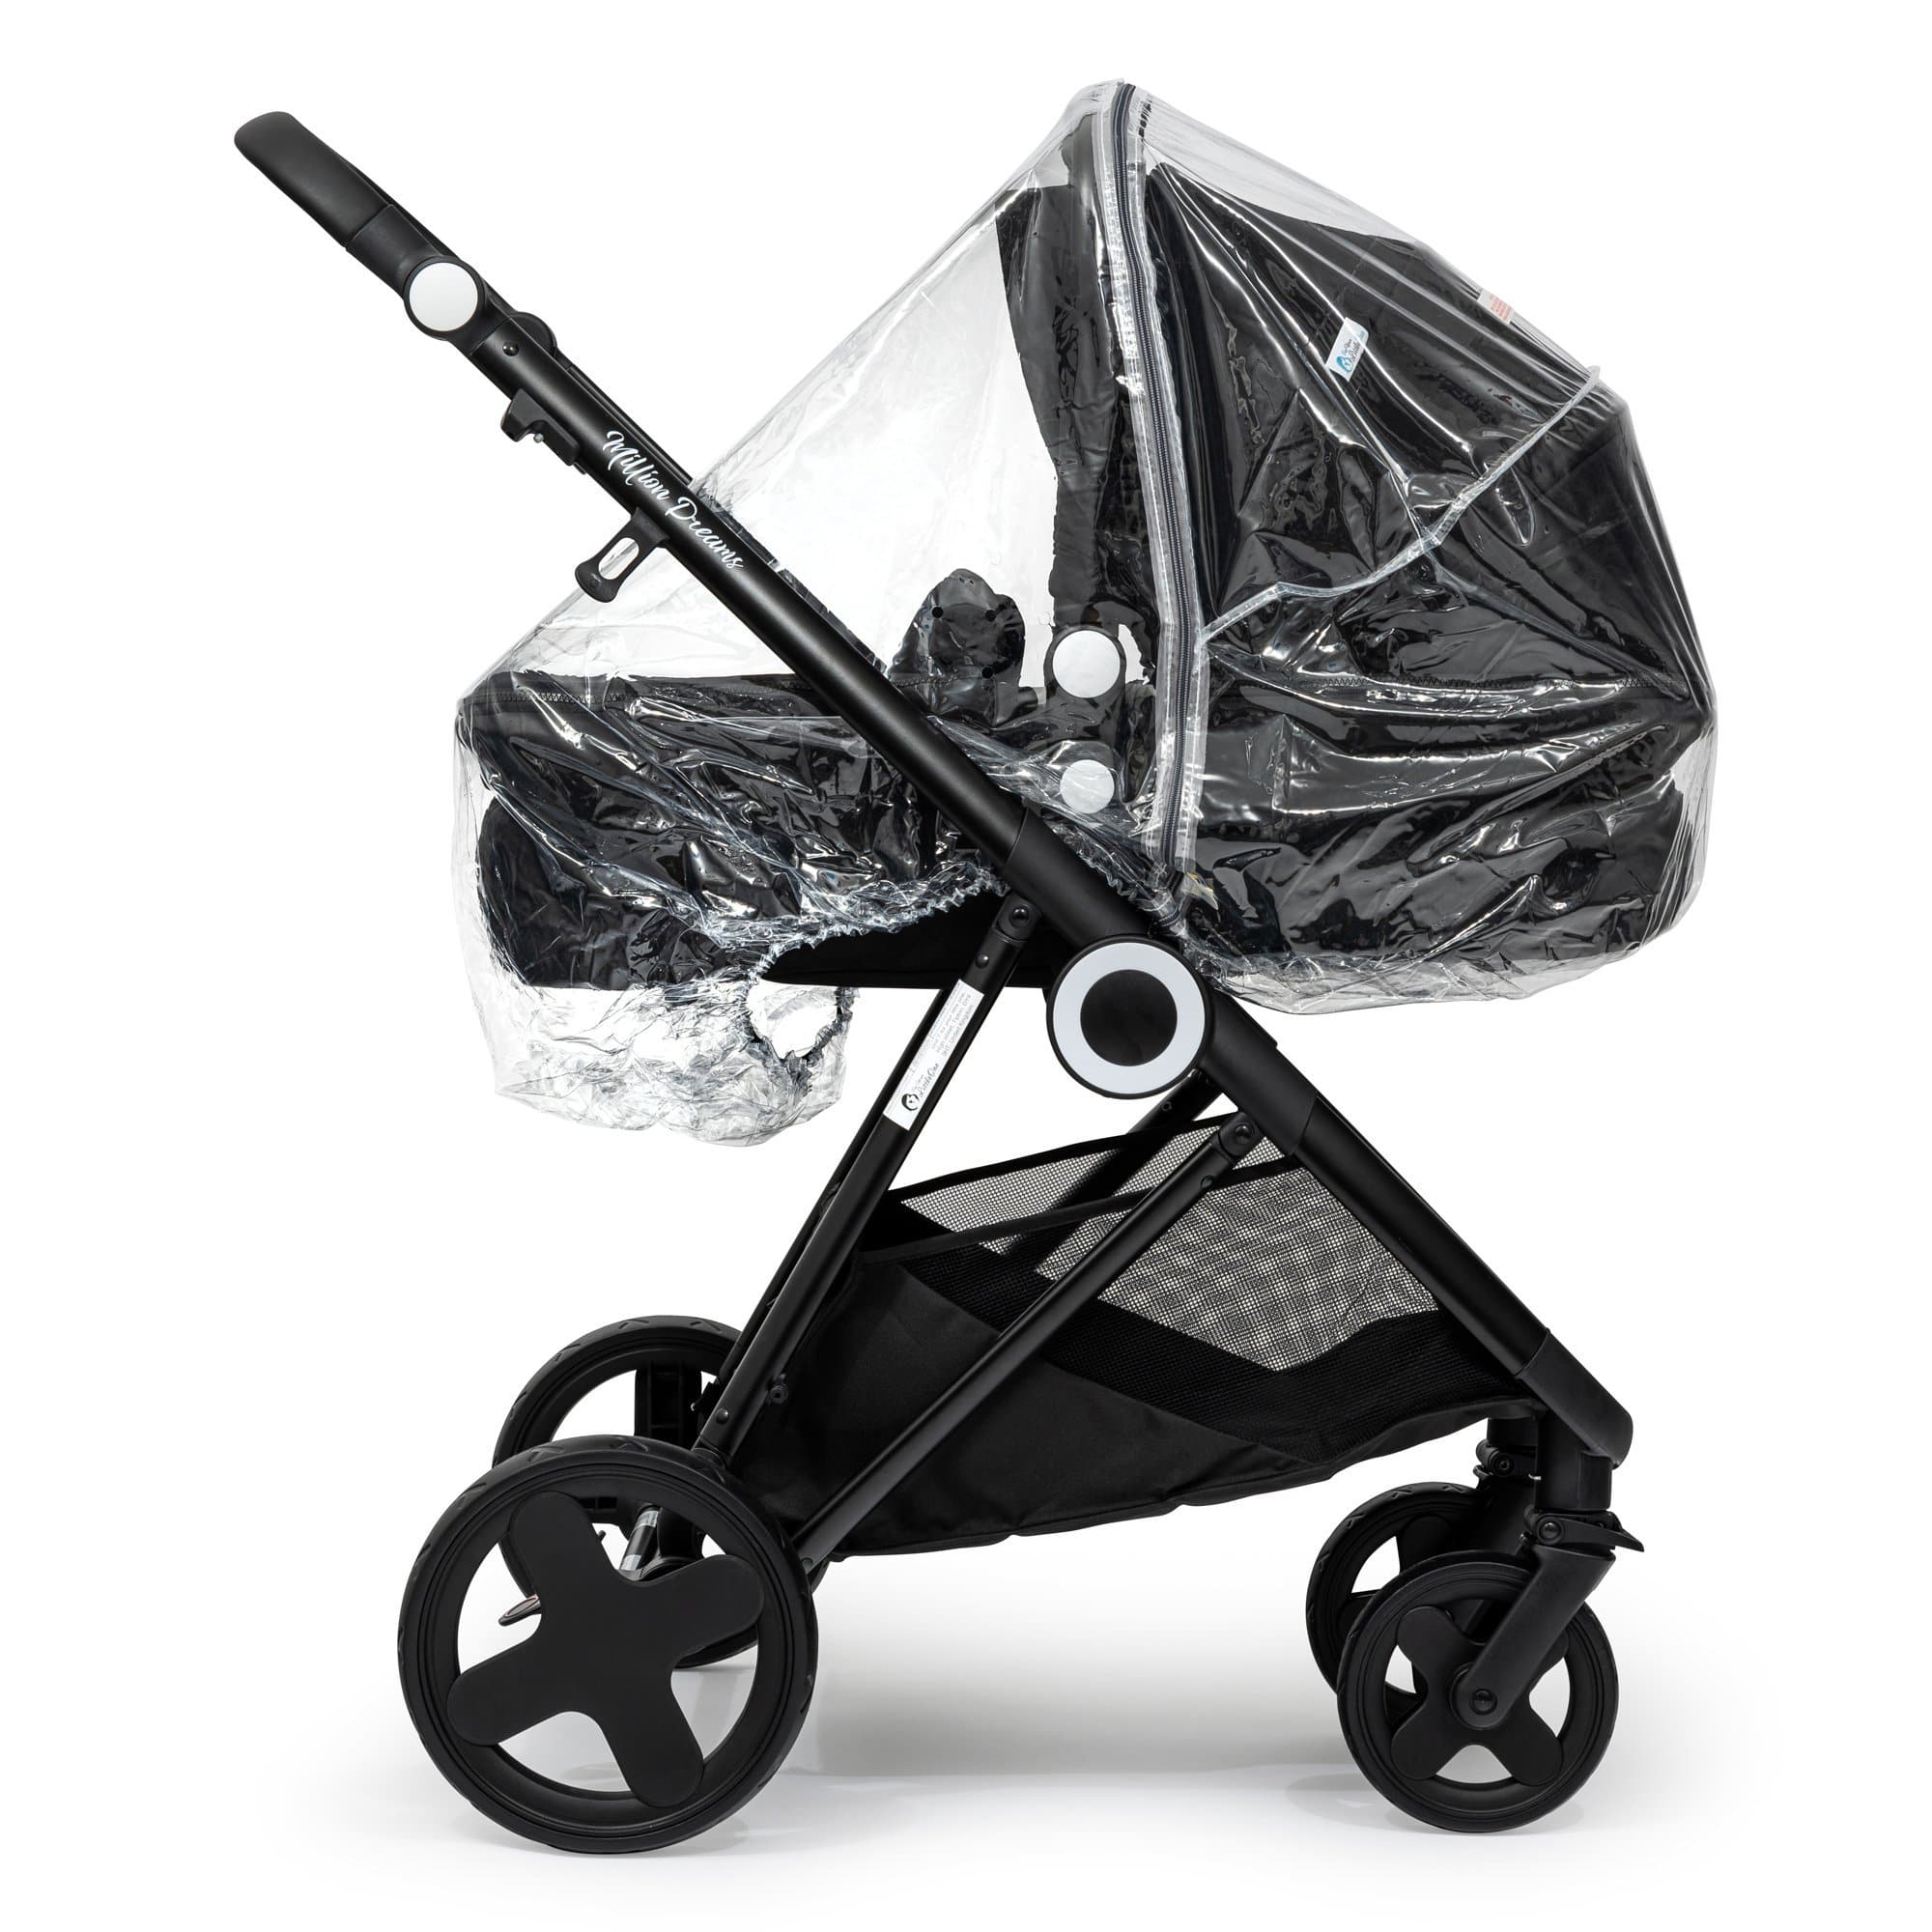 2 in 1 Rain Cover Compatible with Koochi - Fits All Models - For Your Little One